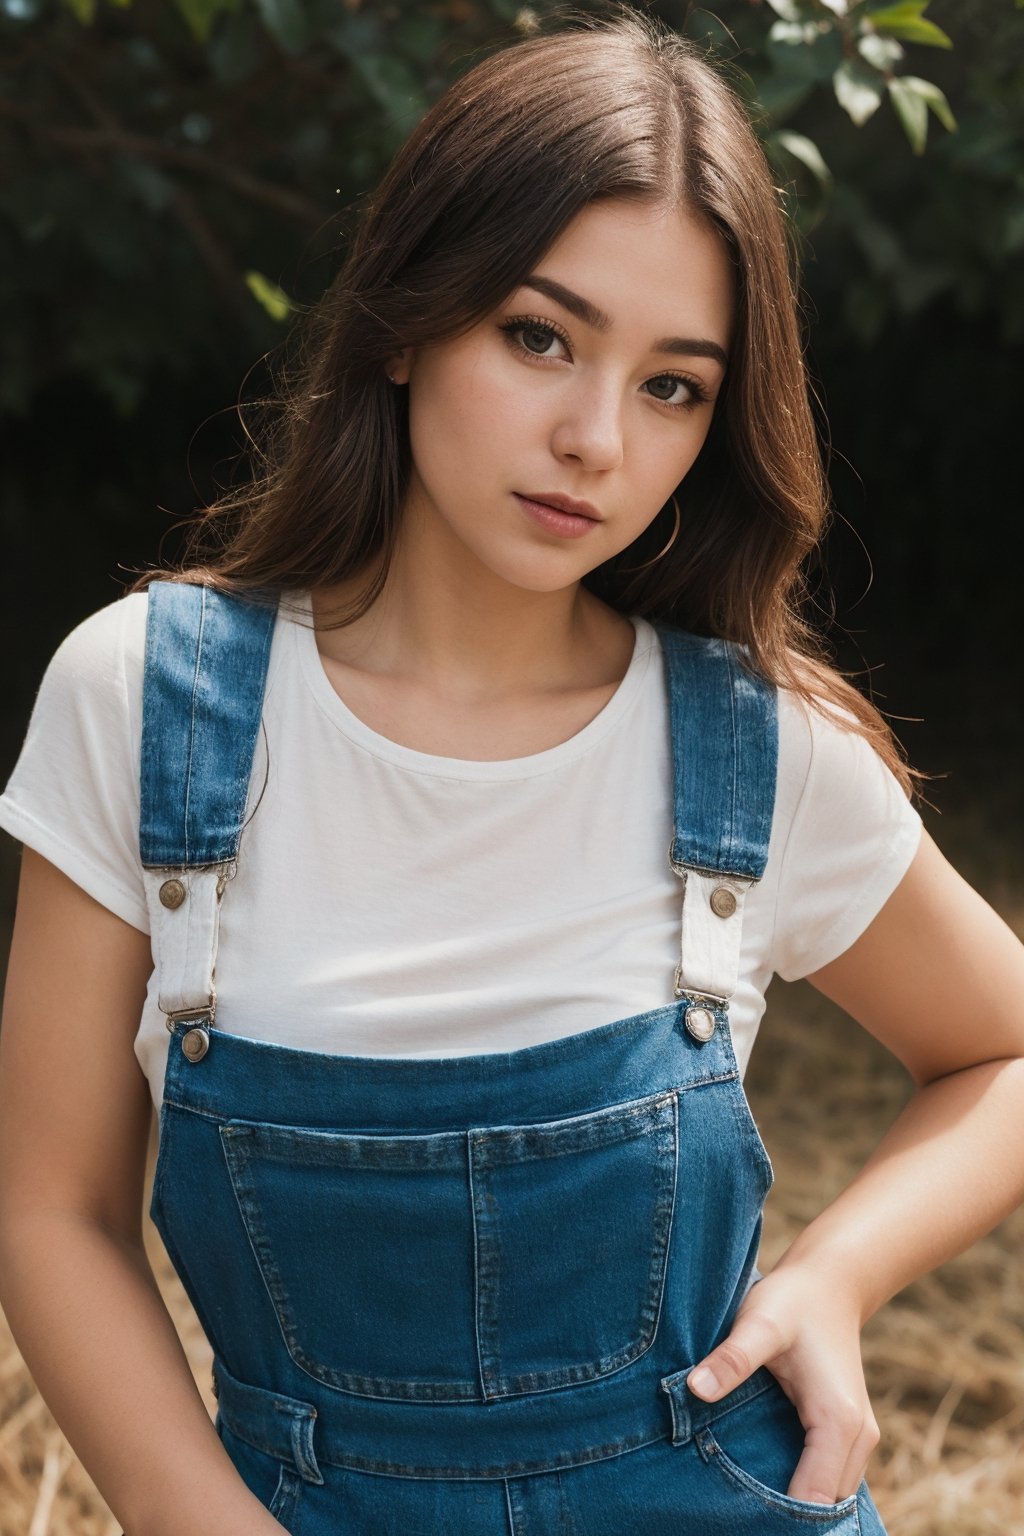 closeup portrait, professional photo, front lit natural lighting, upper body, facing viewer, beautiful thin woman wearing denim overalls, standing straight up outside on a farm, vivid colors,